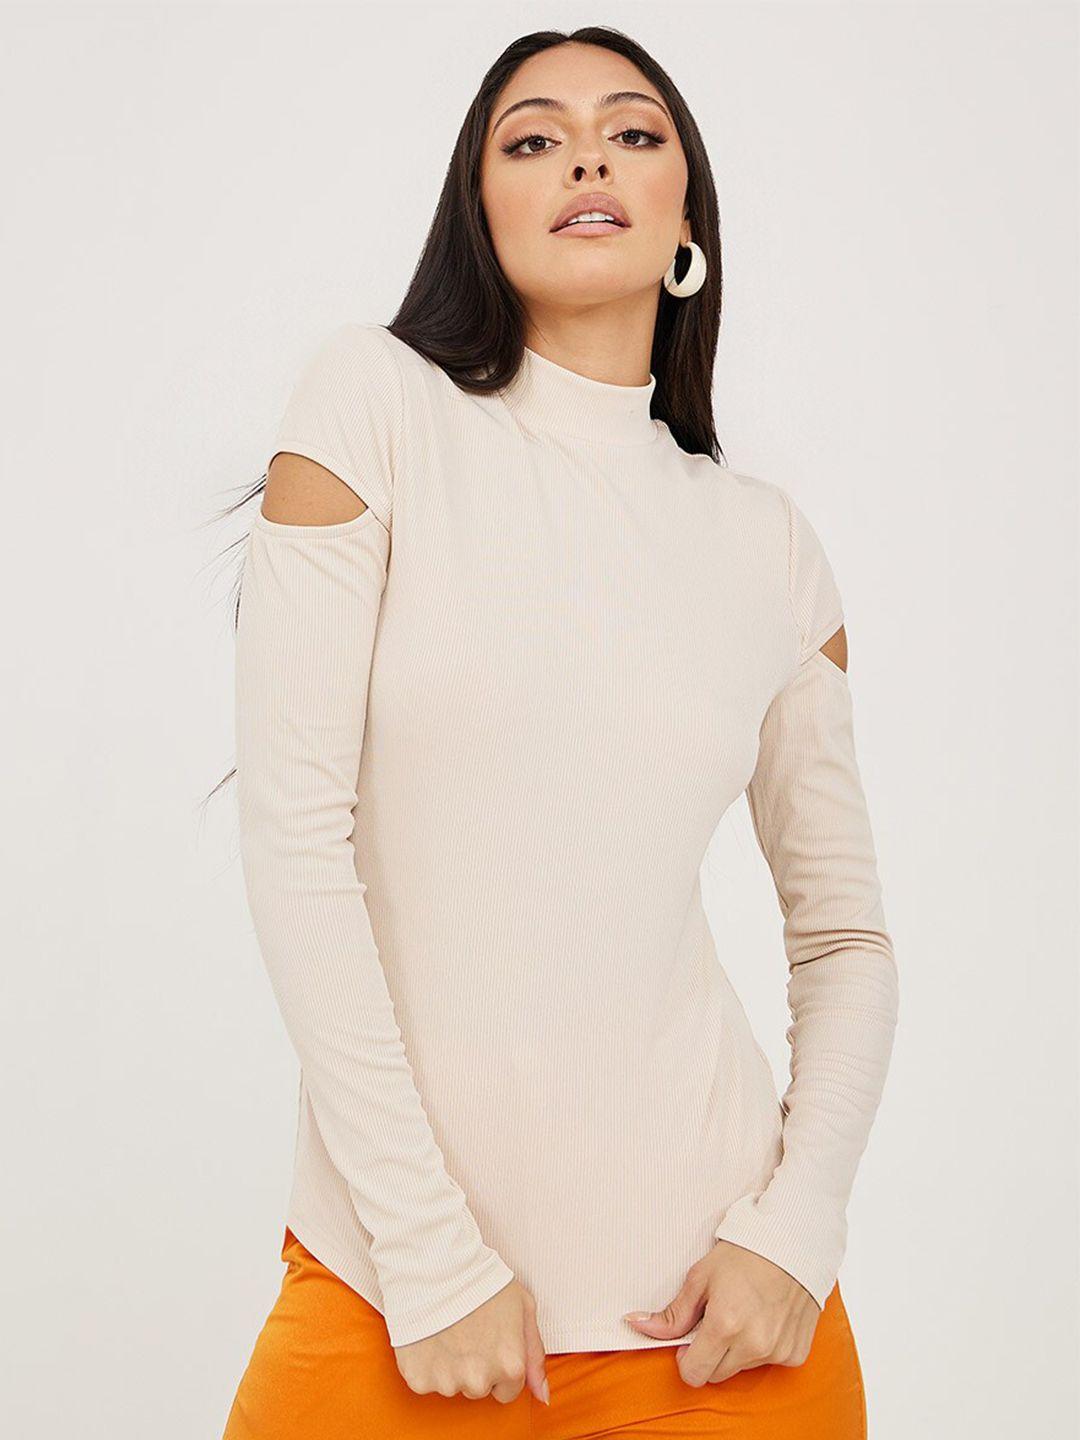 styli woman beige high neck cut-out top